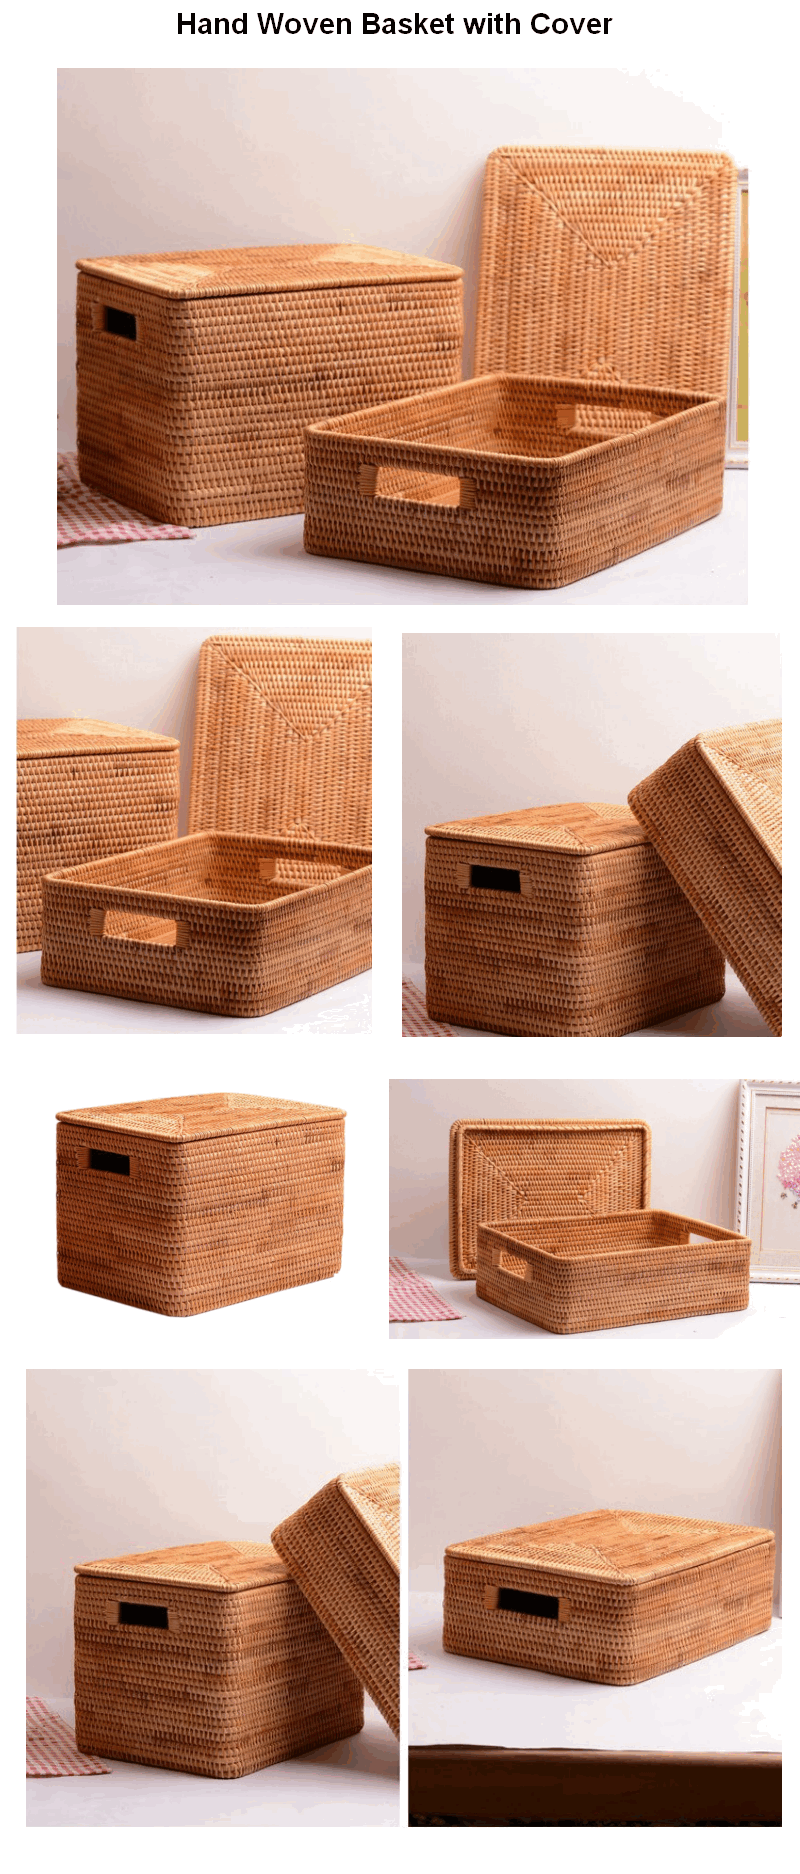 Large Hand Woven Rattan Basket with Handle